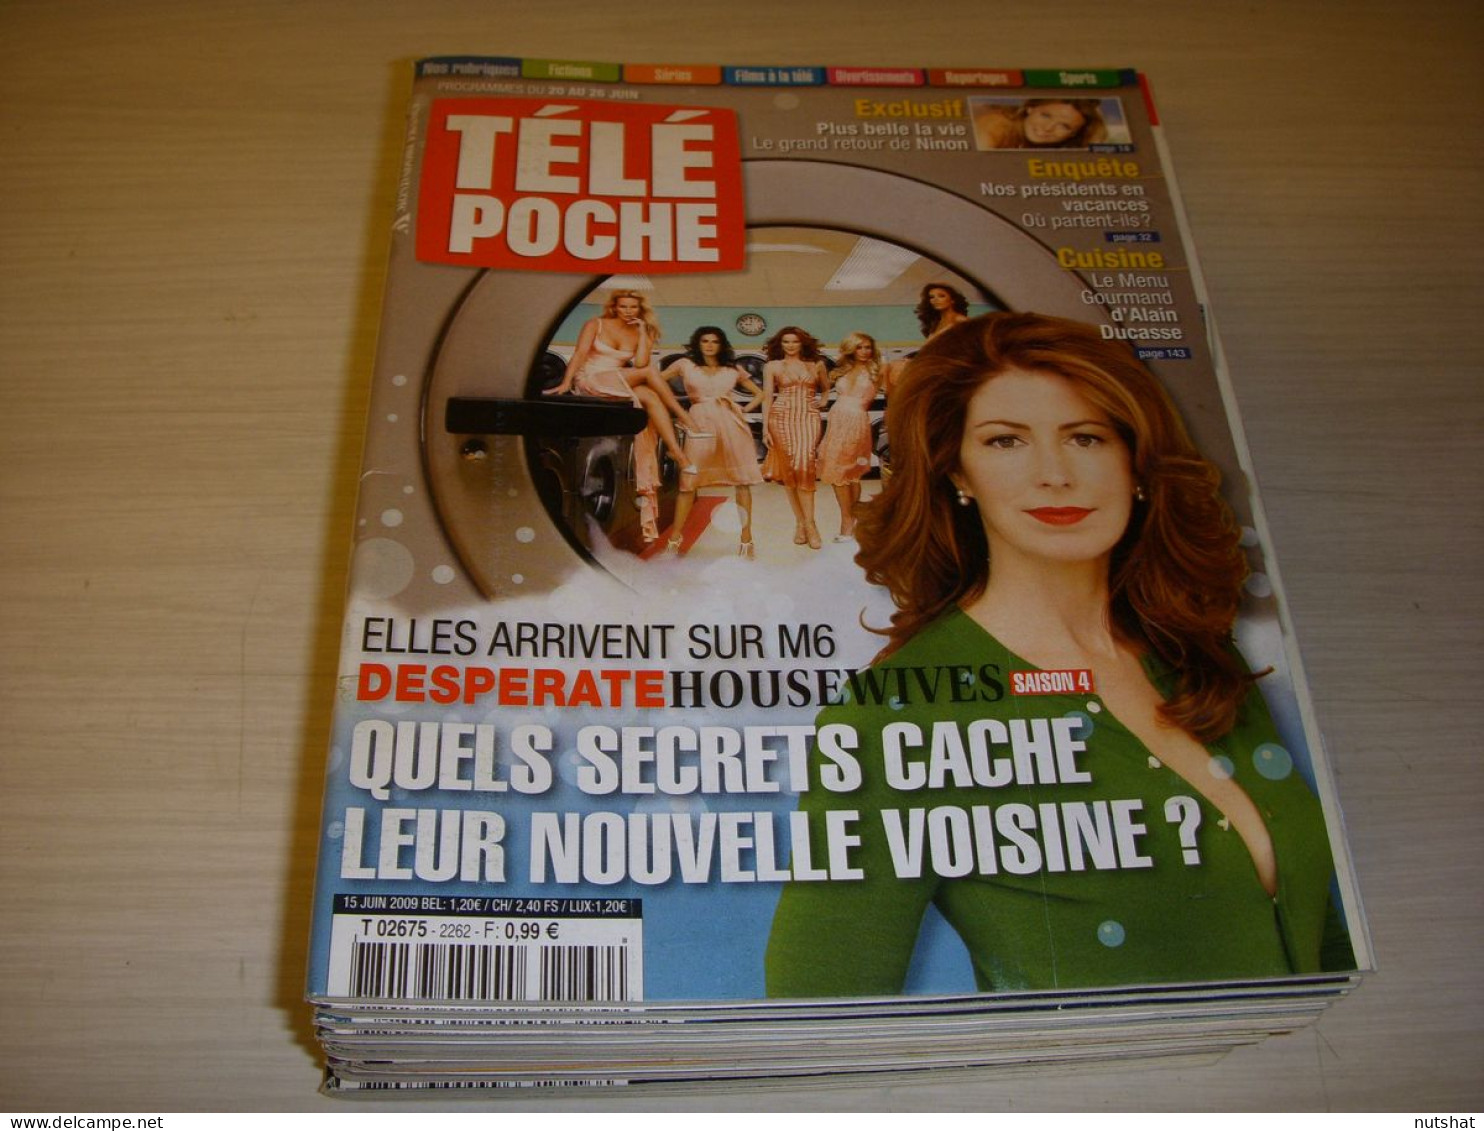 TELE POCHE 2262 15.06.2009 DESPERATE HOUSEWIVES Katherine MAYFAIR Eric TABARLY - Télévision